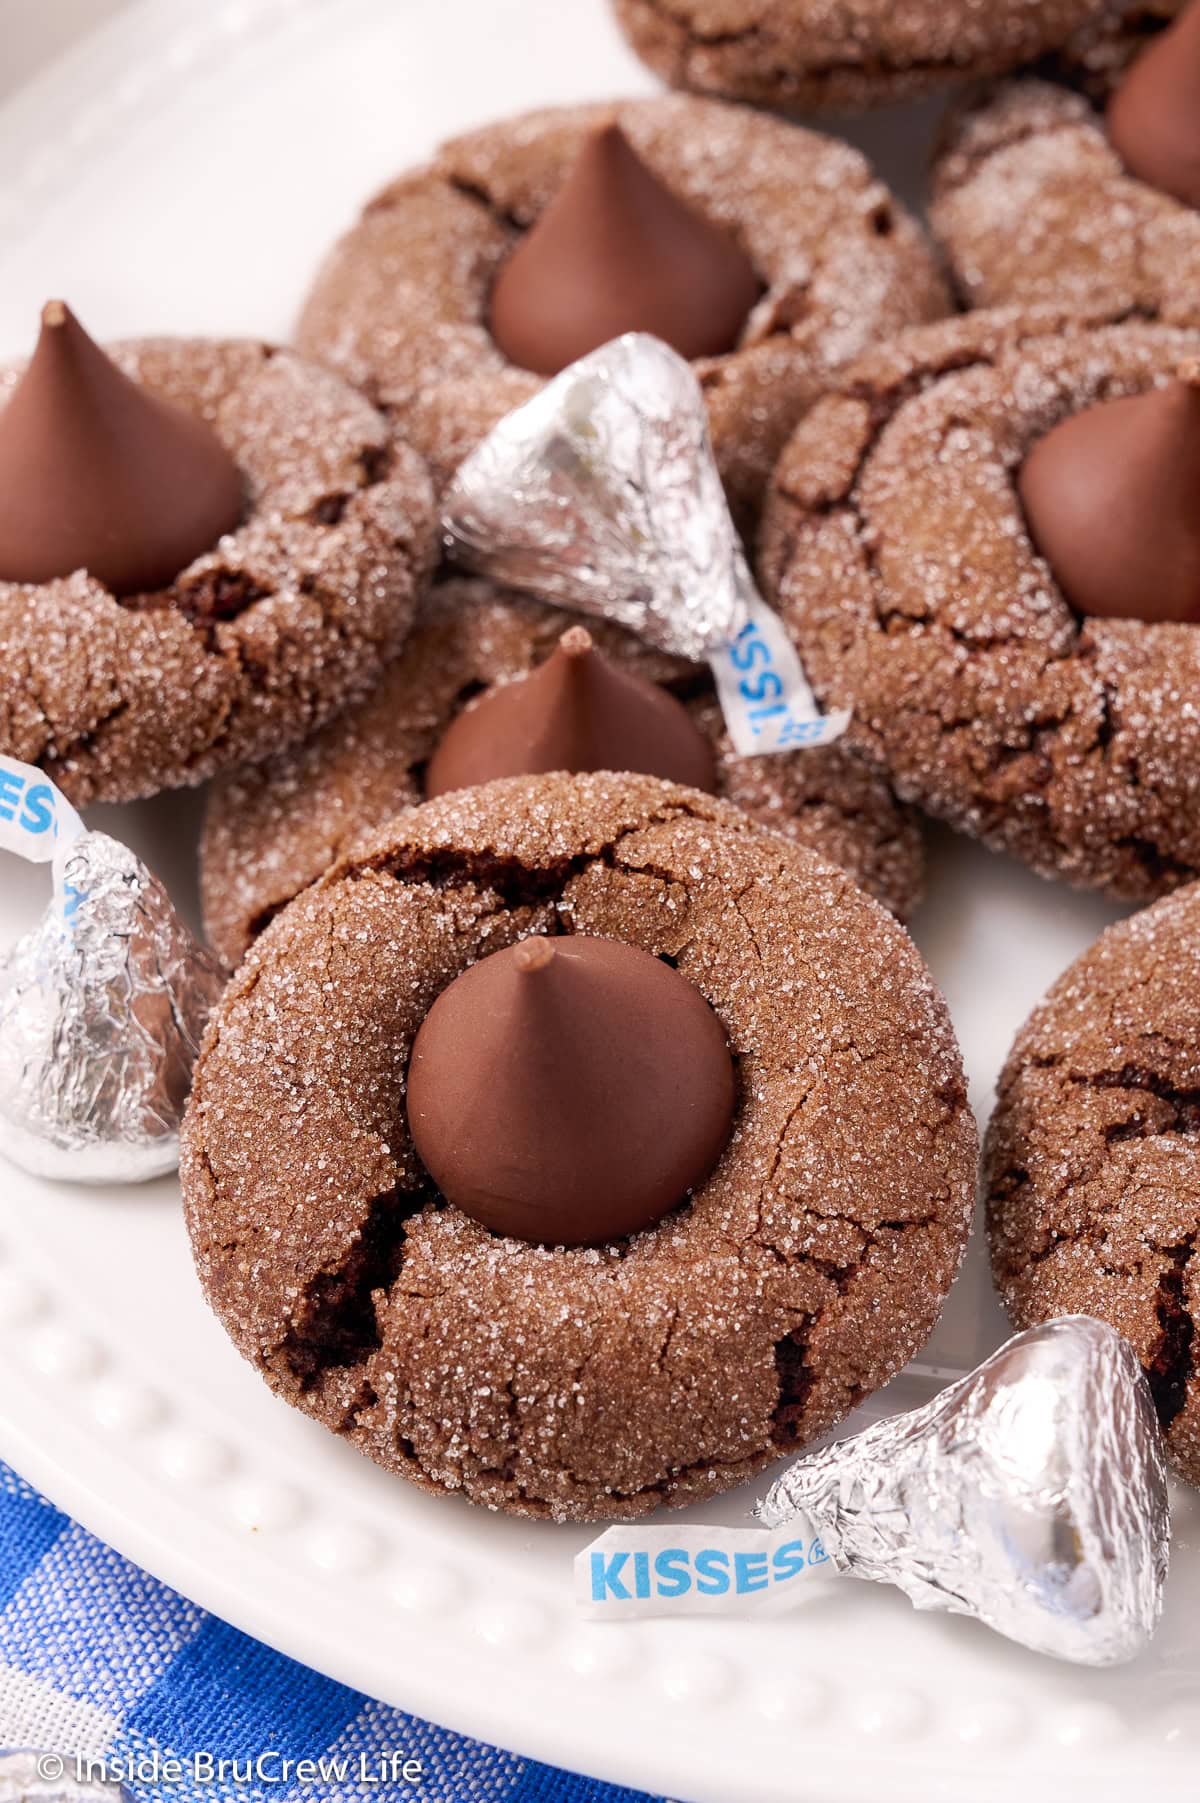 Chocolate cookies topped with Hershey kisses on a plate.